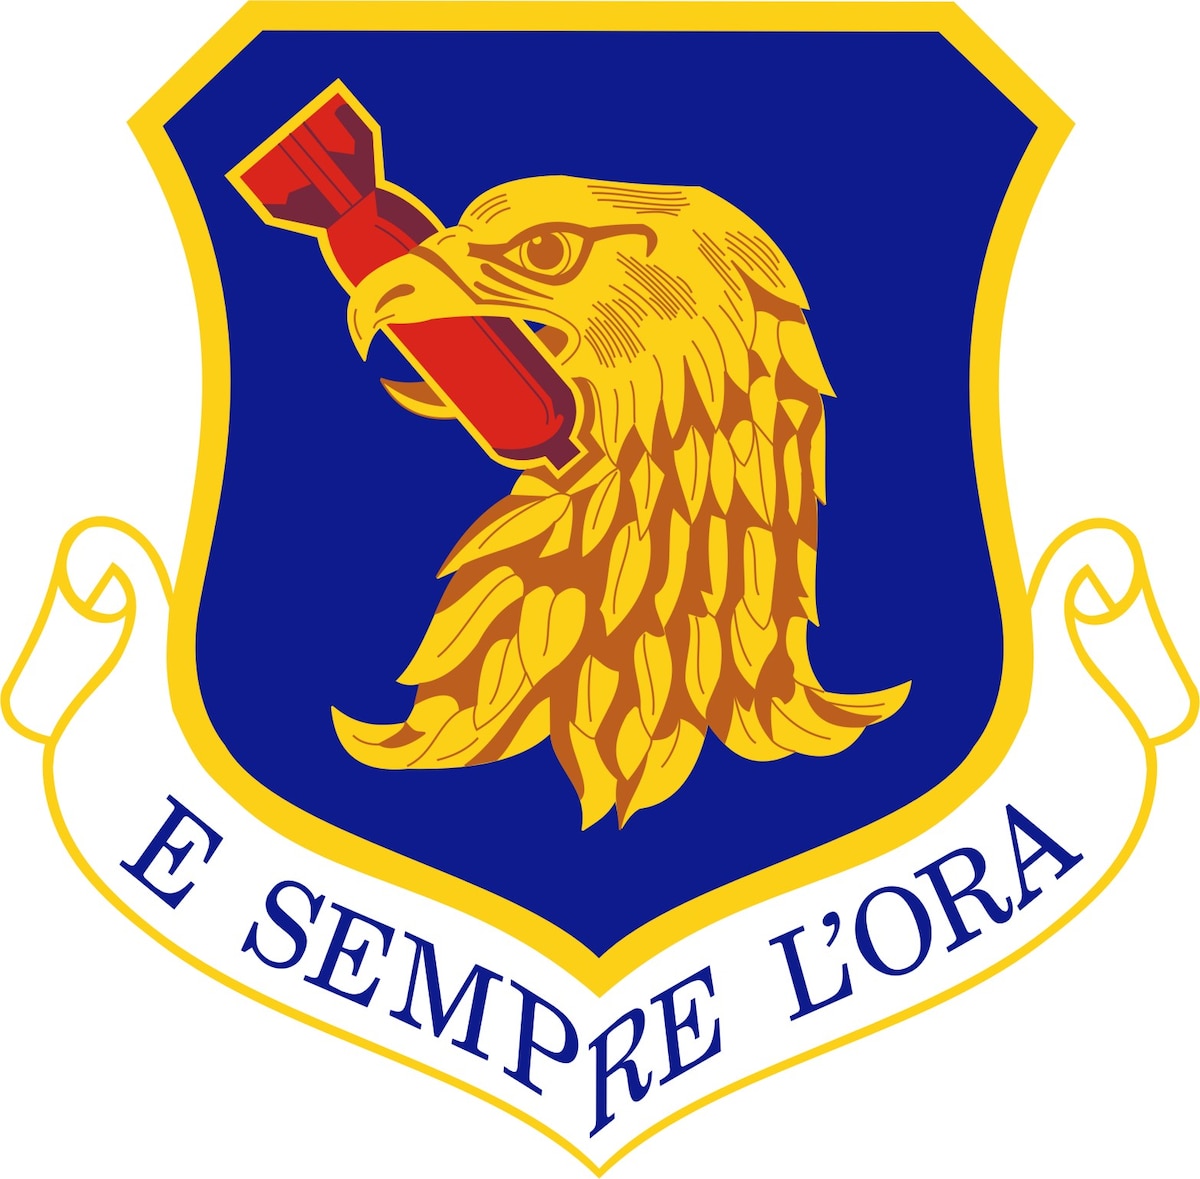 In accordance with Chapter 3 of AFI 84-105, commercial reproduction of this emblem is NOT permitted without the permission of the proponent organizational/unit commander.
